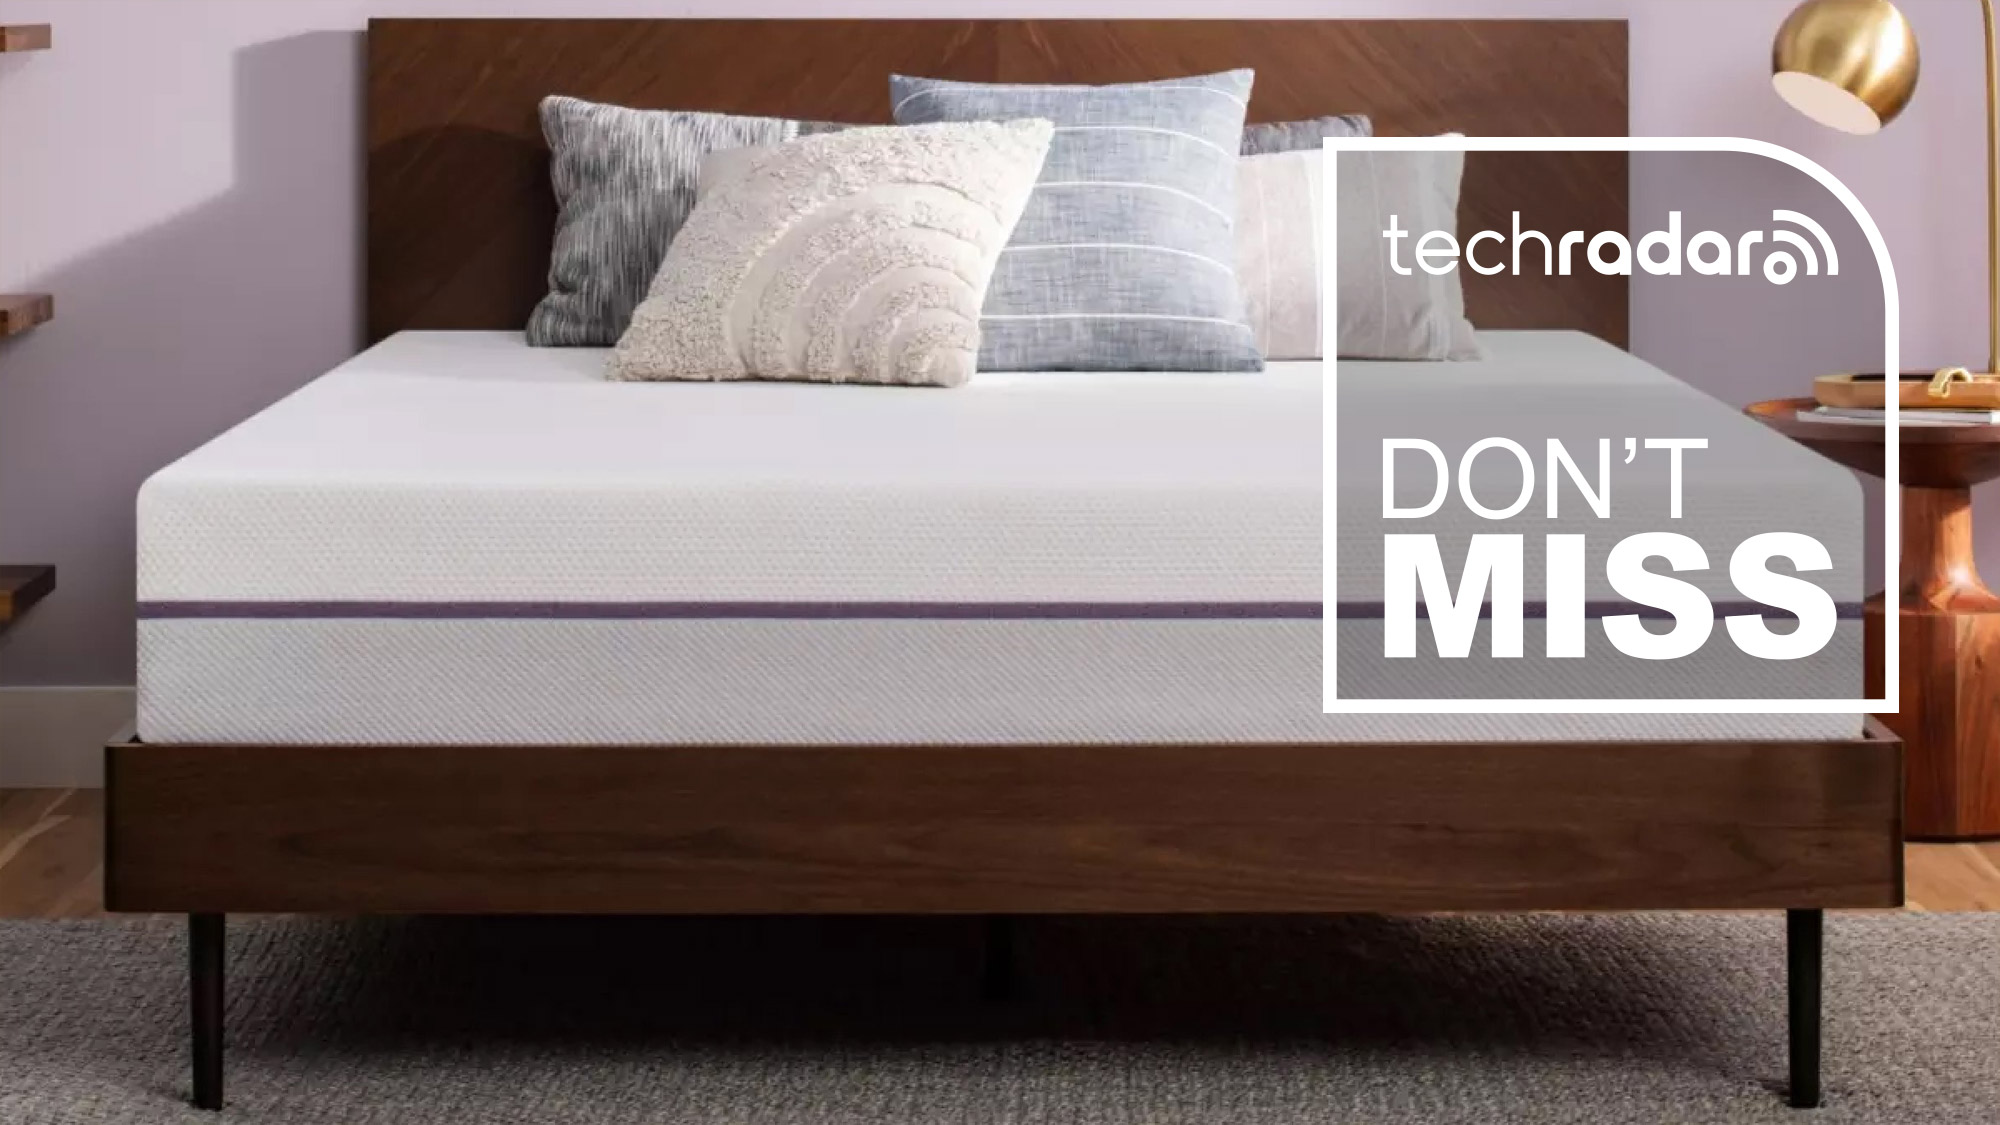 Purple just dropped a ridiculous $400 discount on its Original mattress ...